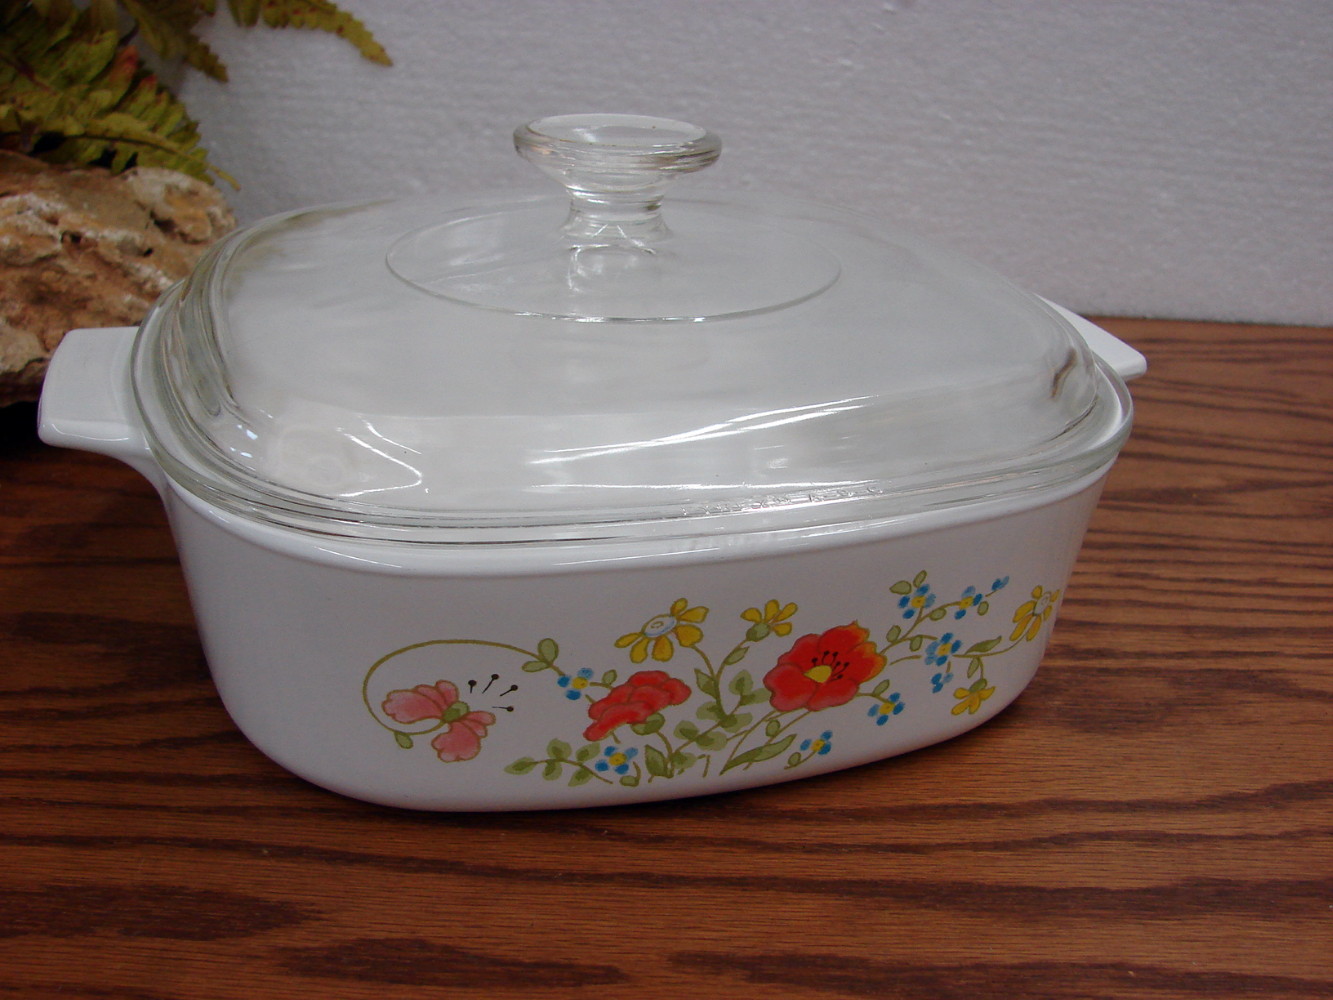 Vintage Corning Ware Wildflower Range Topper 8-1/2 skillet with lid. -  Rocky Mountain Estate Brokers Inc.